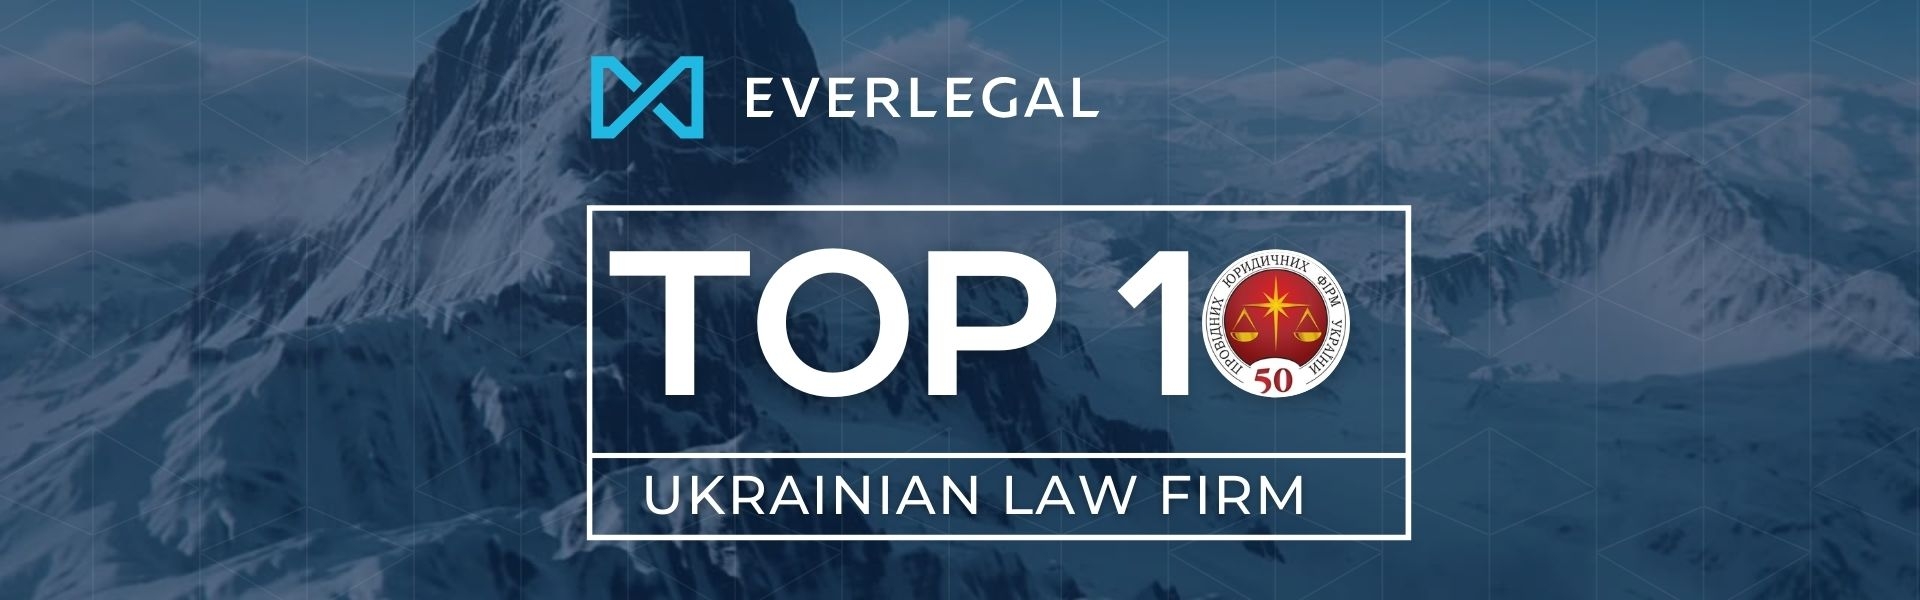 EVERLEGAL among TOP 10 leading Ukrainian law firms